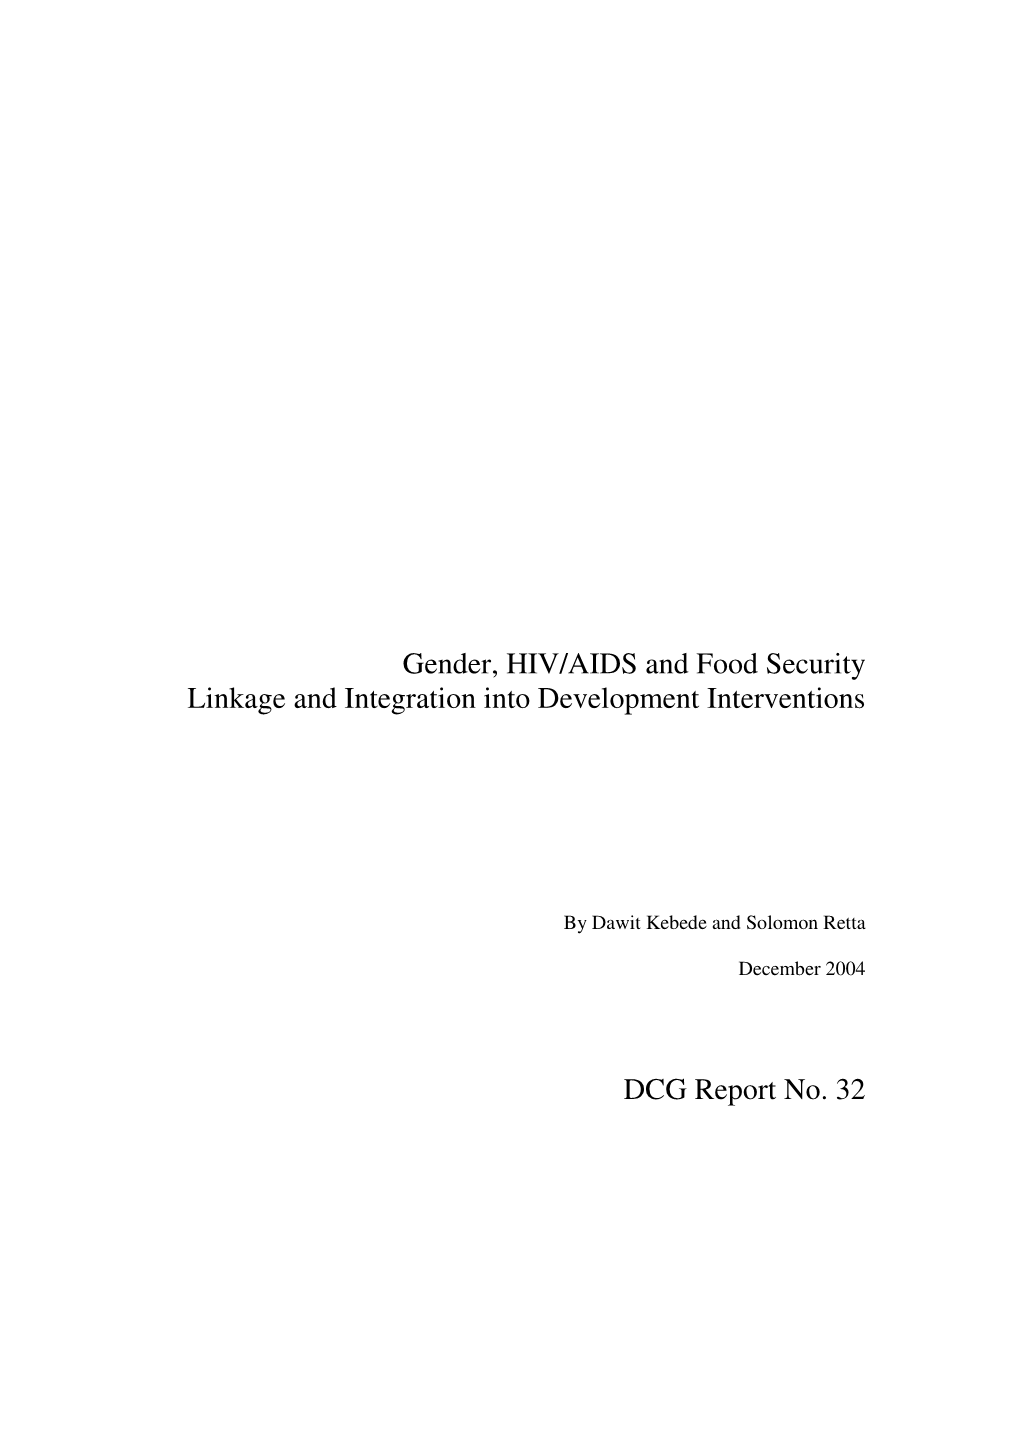 Gender, HIV/AIDS and Food Security Linkage and Integration Into Development Interventions DCG Report No. 32